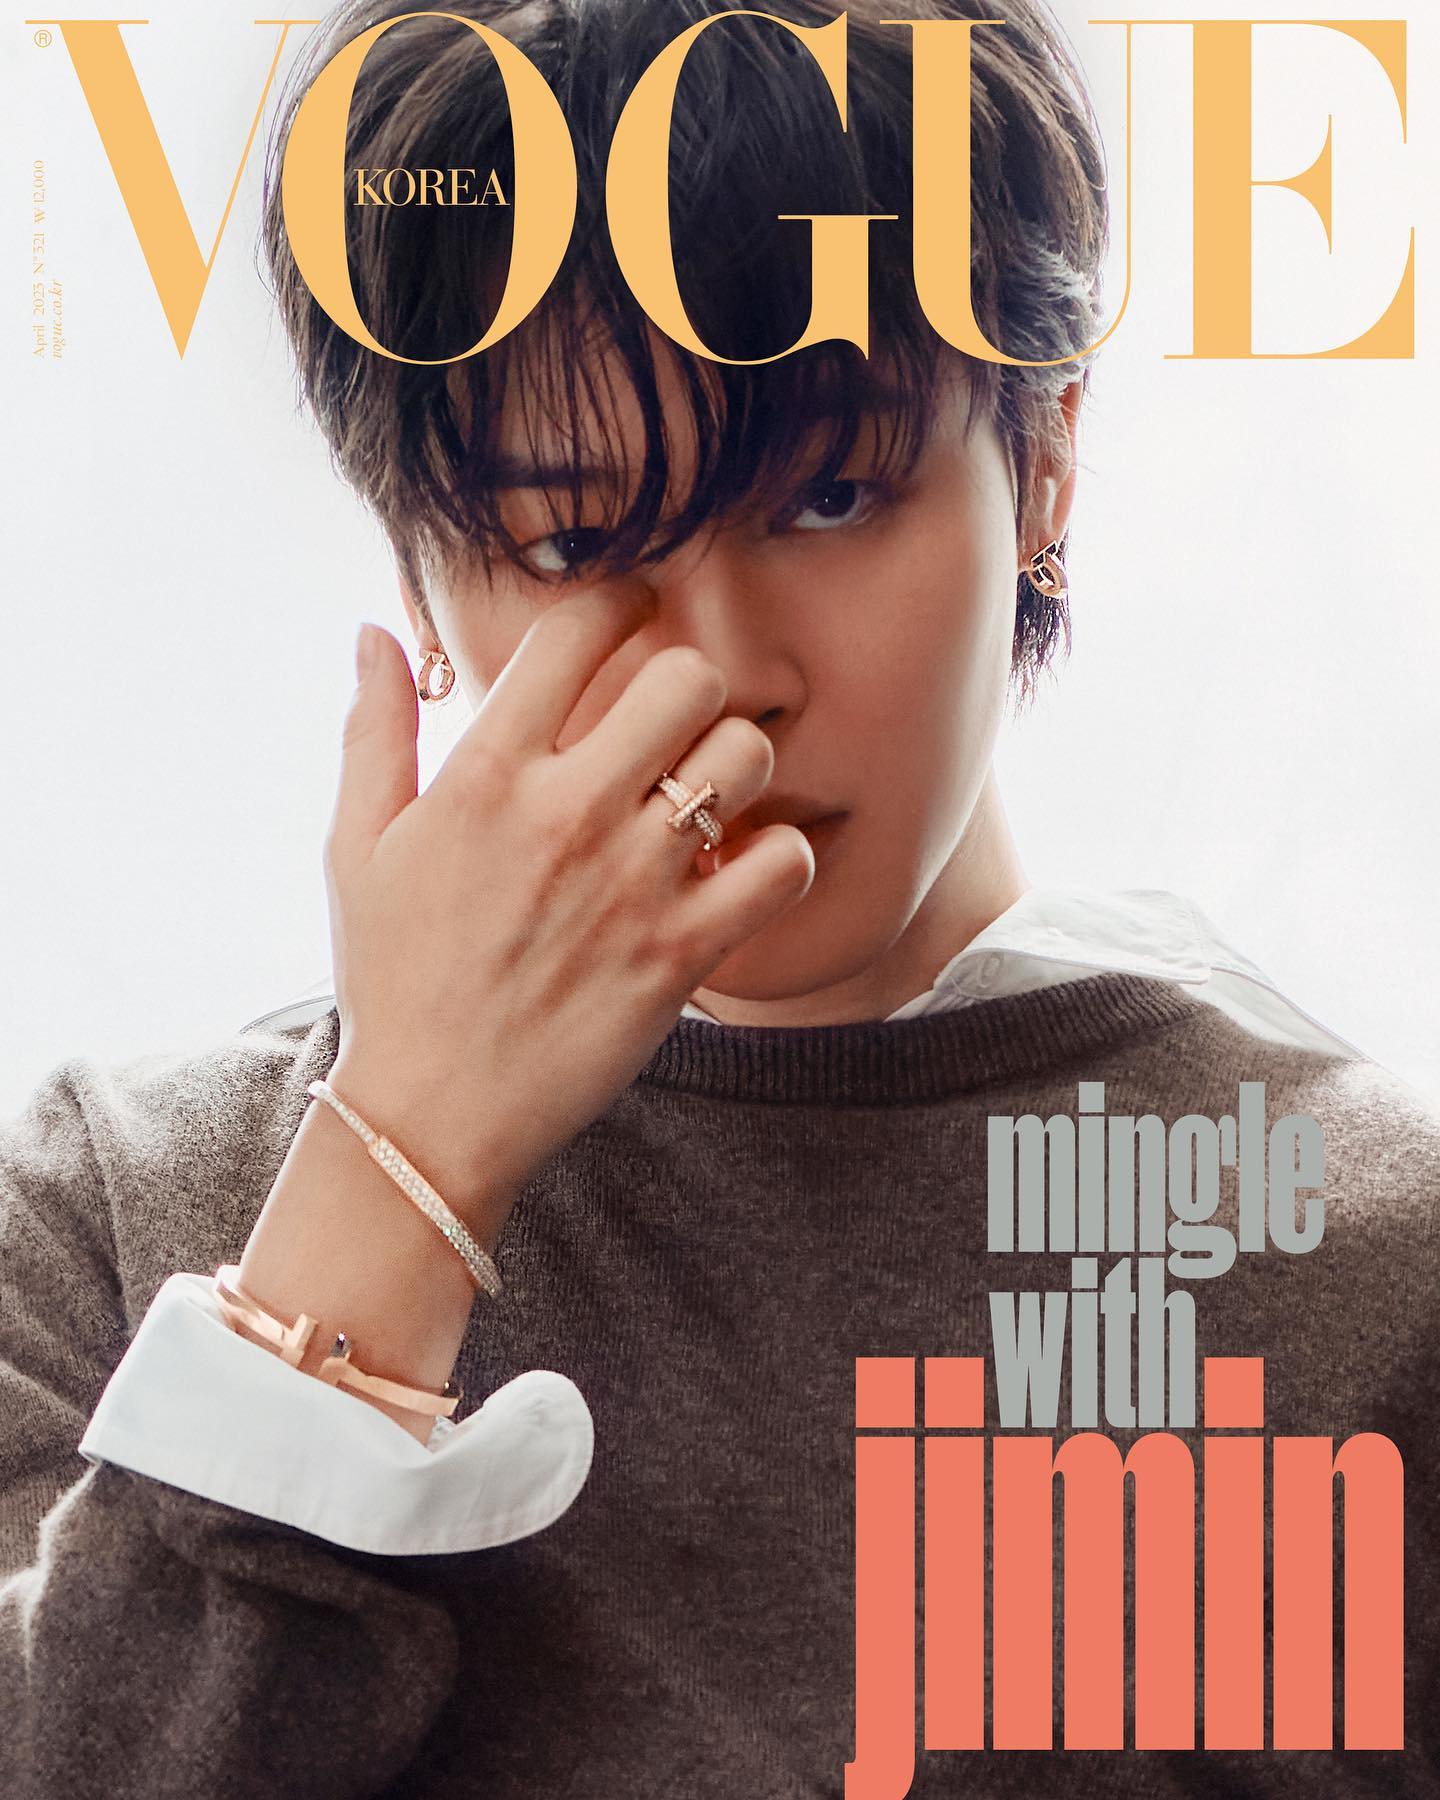 The BTS Special Editions Of Vogue Korea and GQ Korea Are Coming